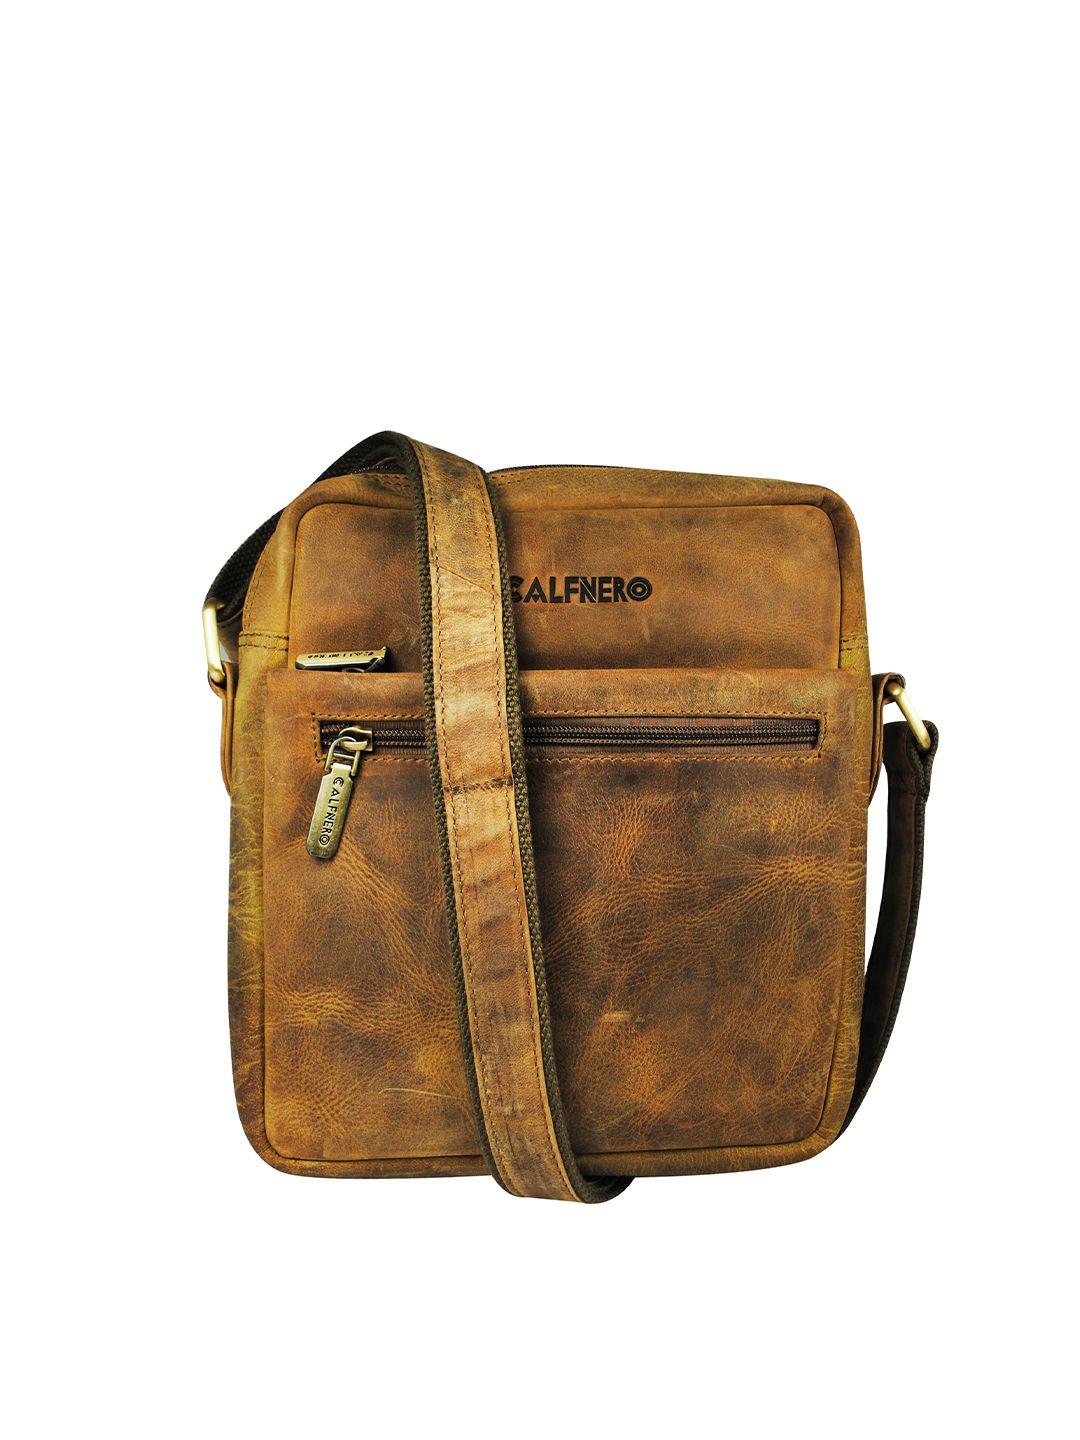 calfnero brown leather structured sling bag